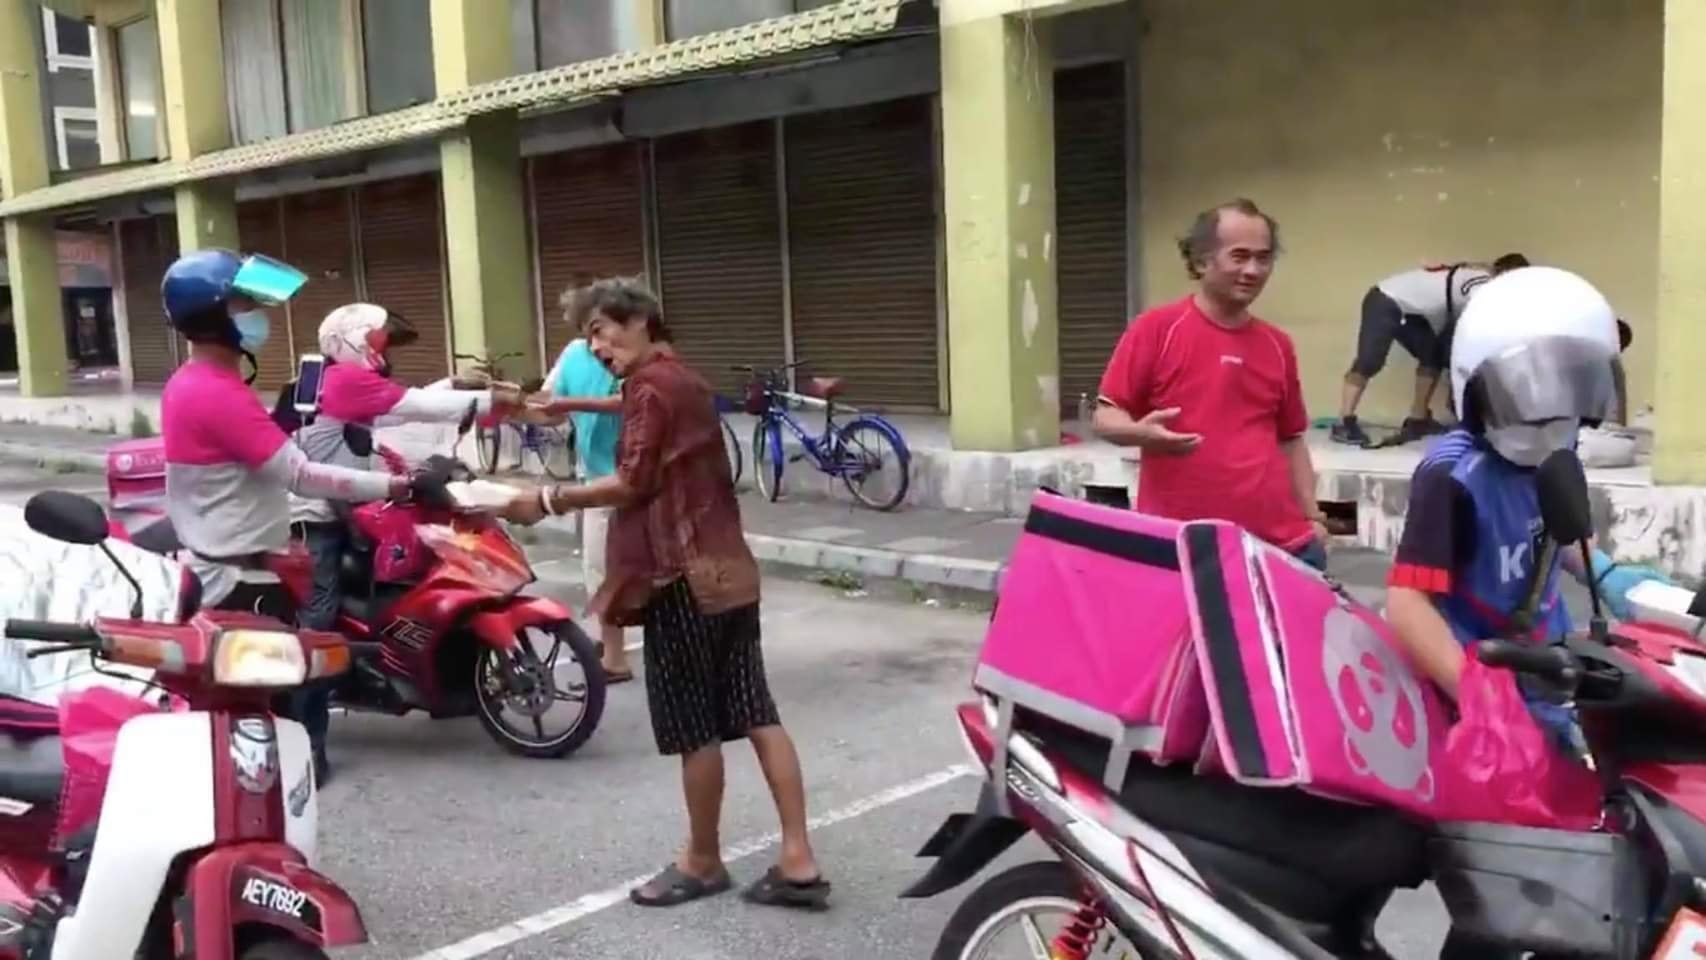 Charitable Food Panda Deliverymen Distribute Free Packed Meals To Ipoh's Homeless During Mco - World Of Buzz 4